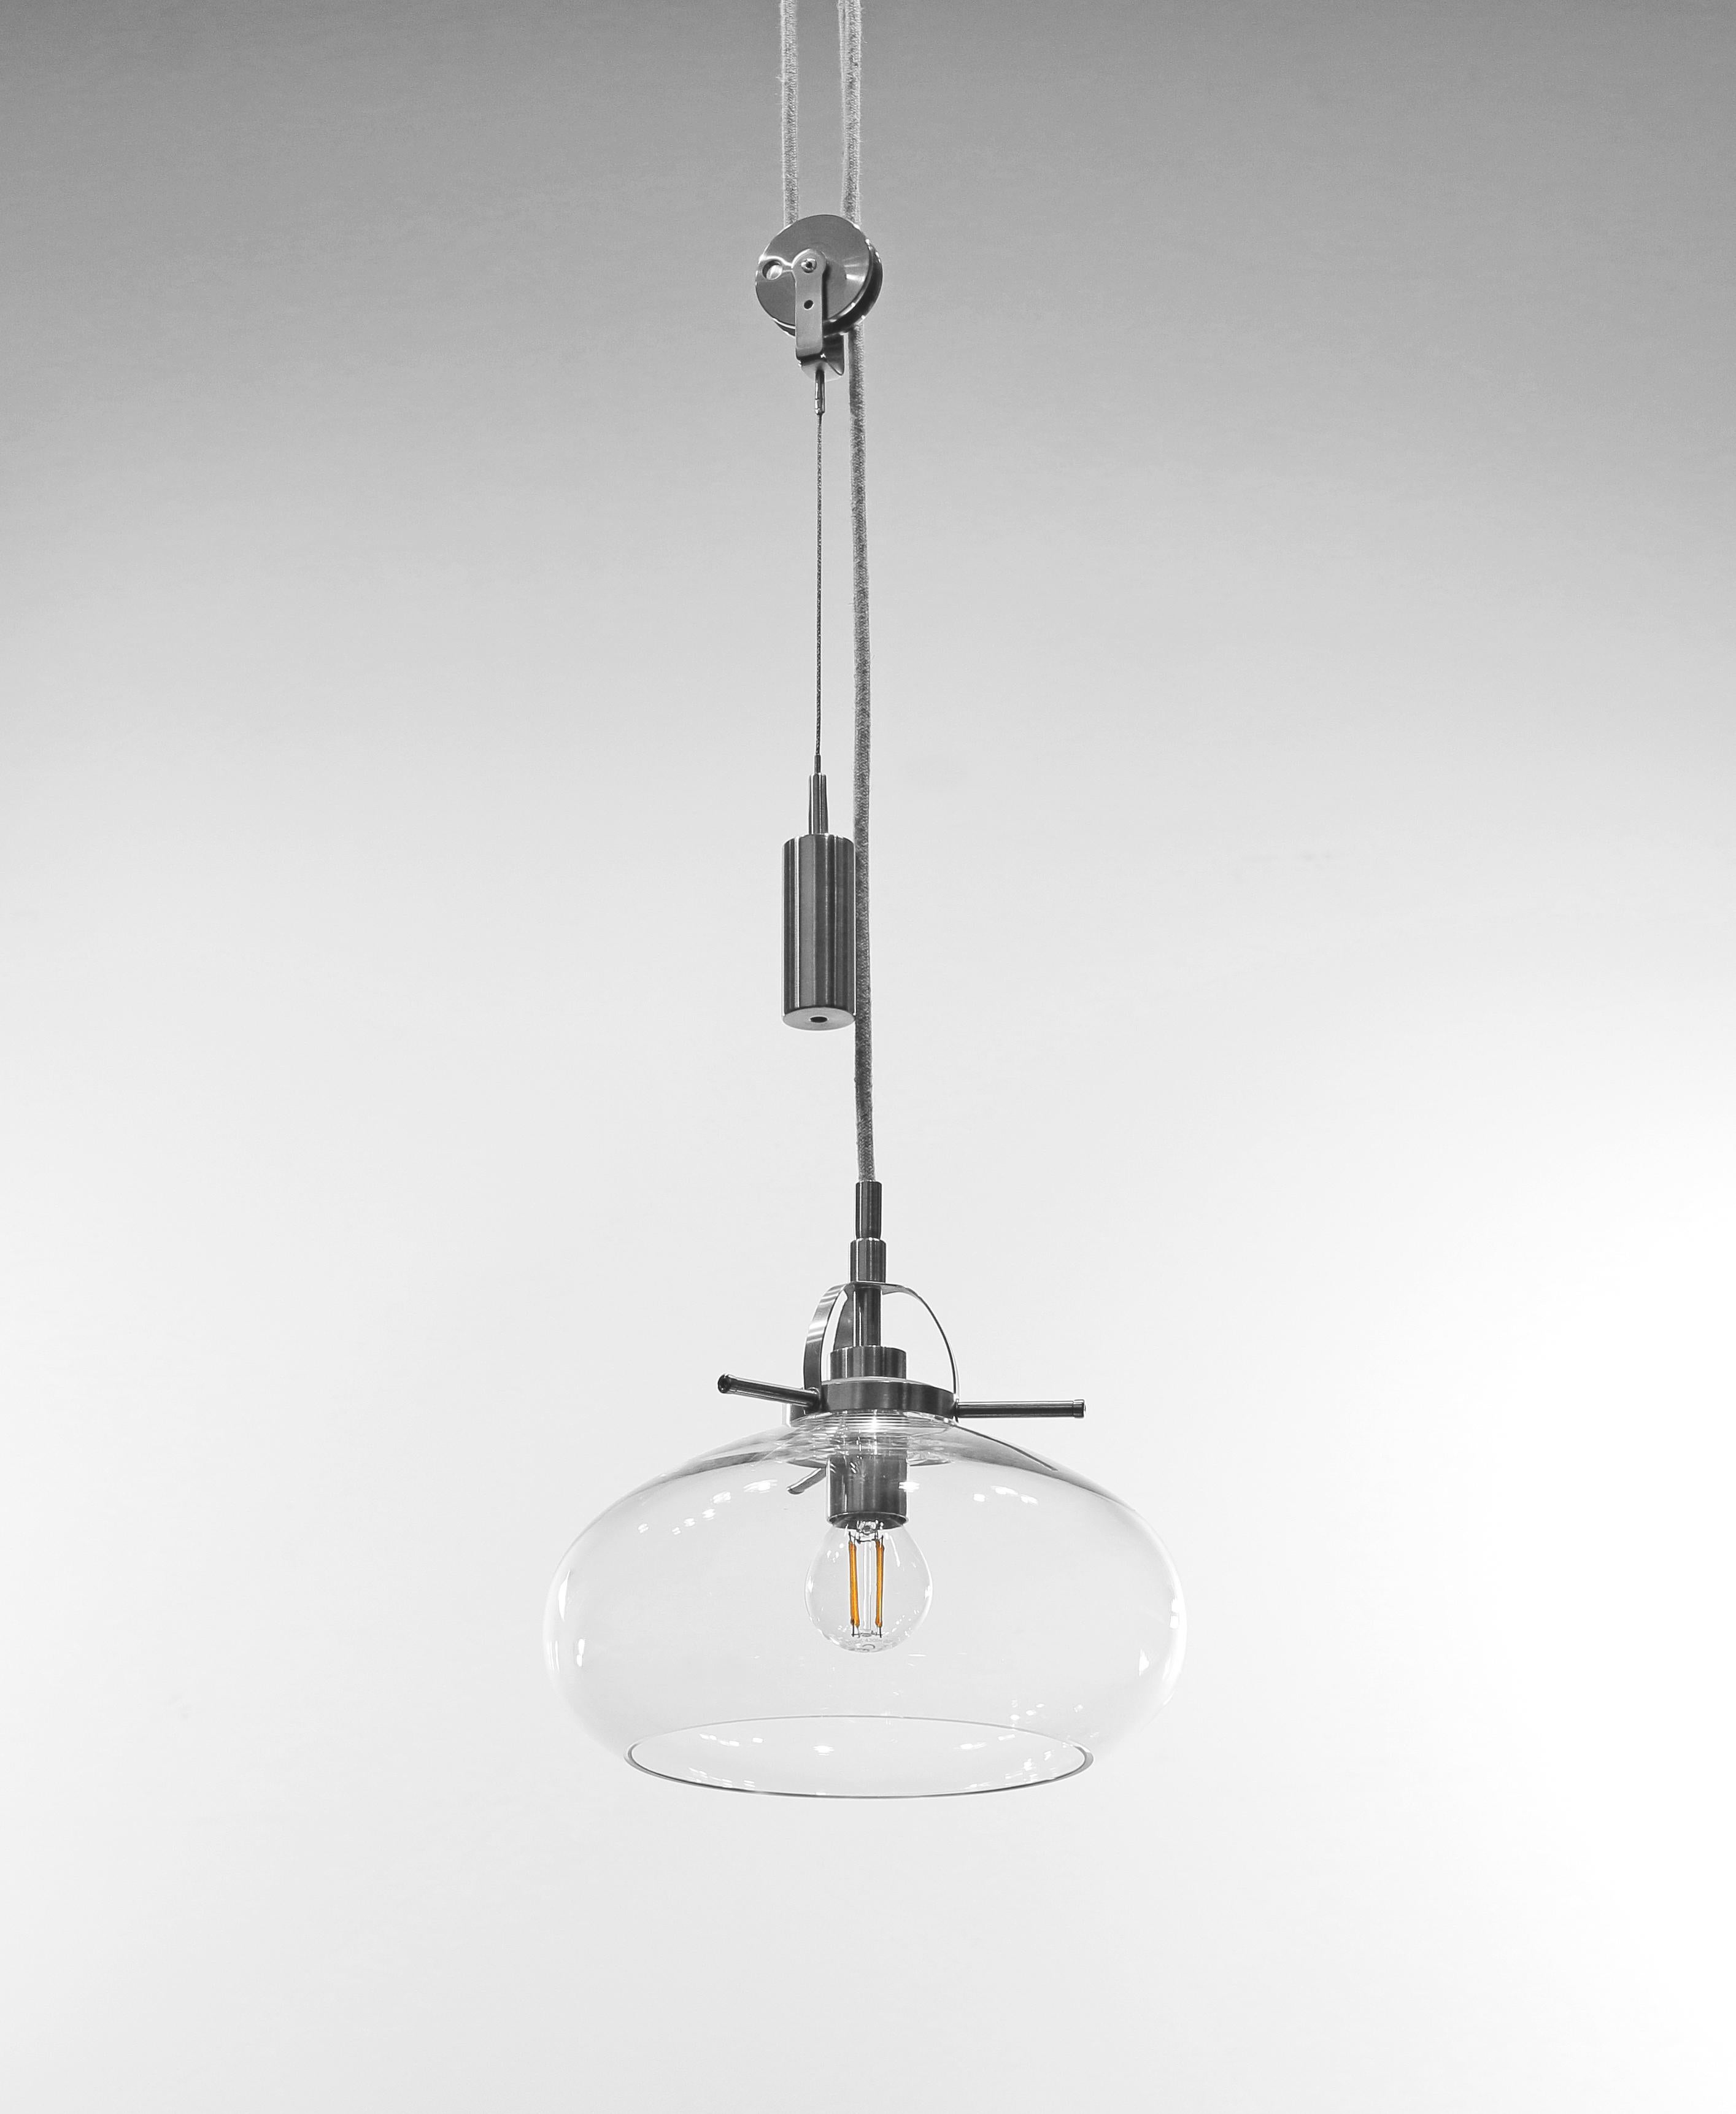 Art Deco-inspired pendant lamp with a weight is crafted with the finest quality materials. This lamp features sleek stainless steel elements and a beautiful clear glass shade that exudes an air of sophistication and elegance.
The lamp boasts a